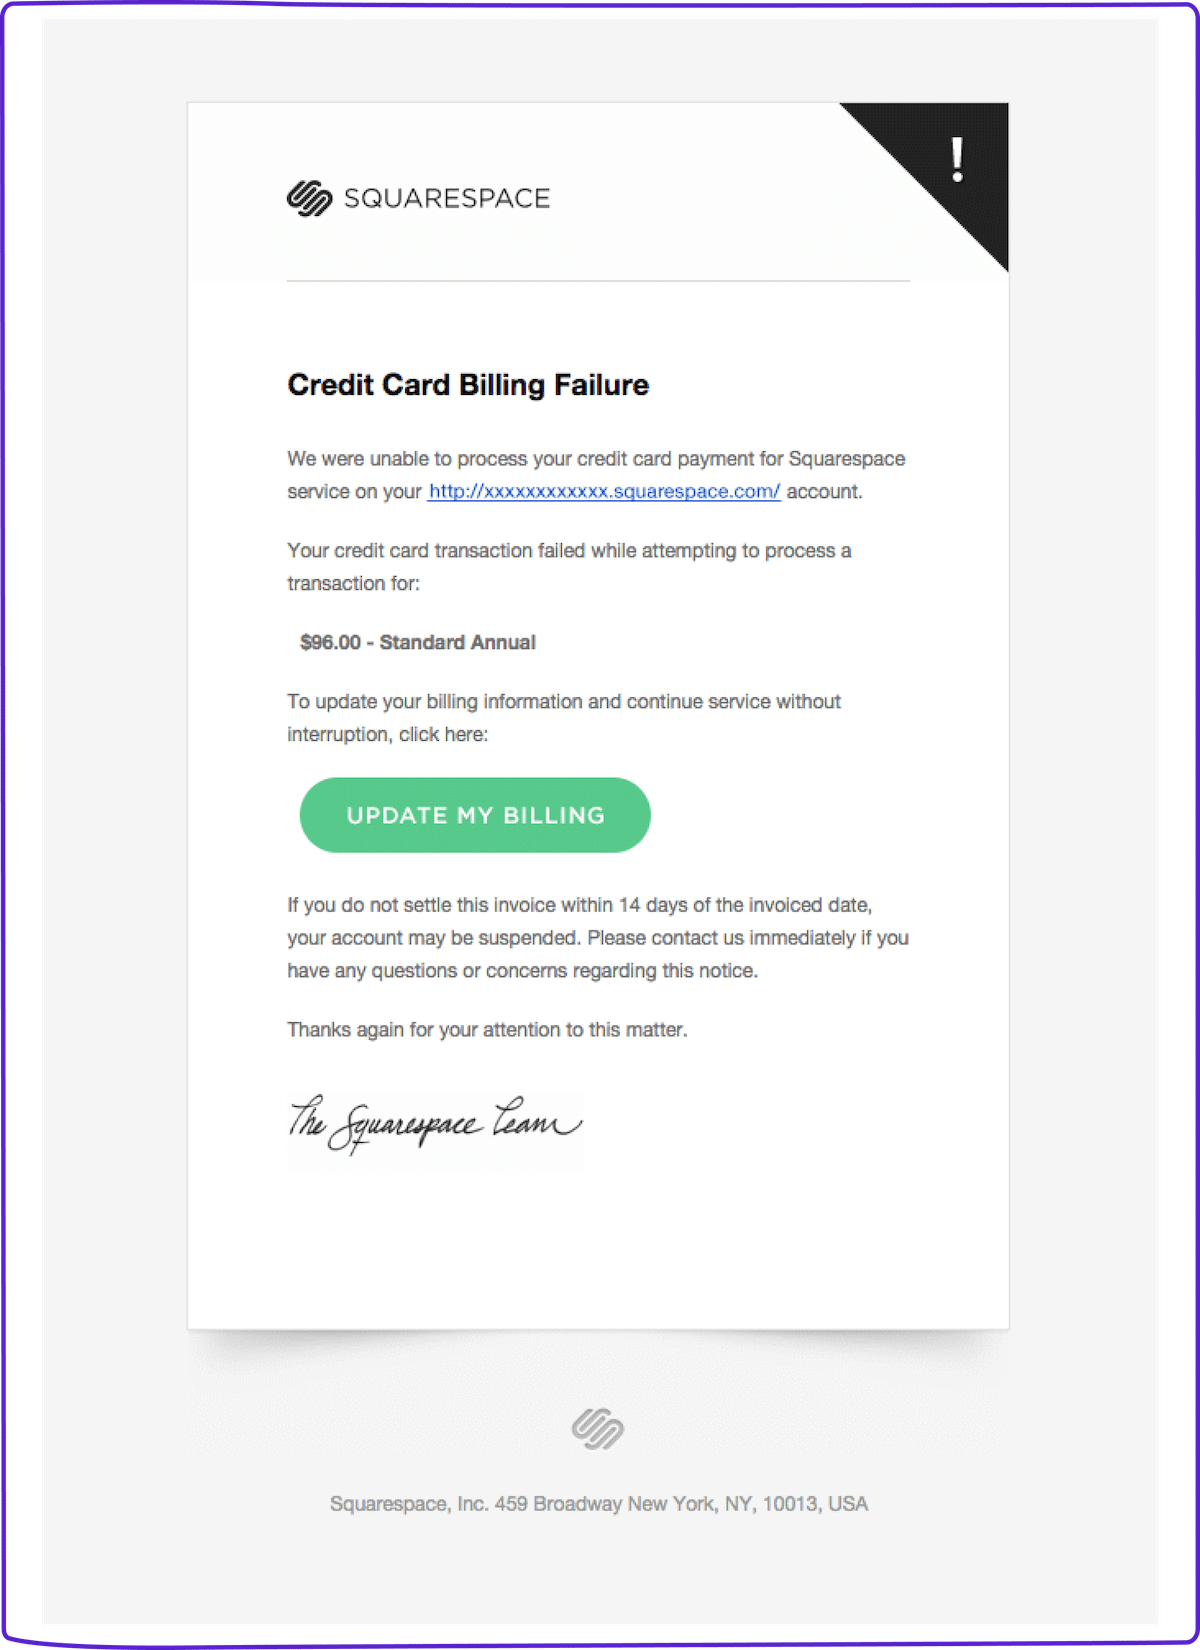 Dunning email example: Squarespace